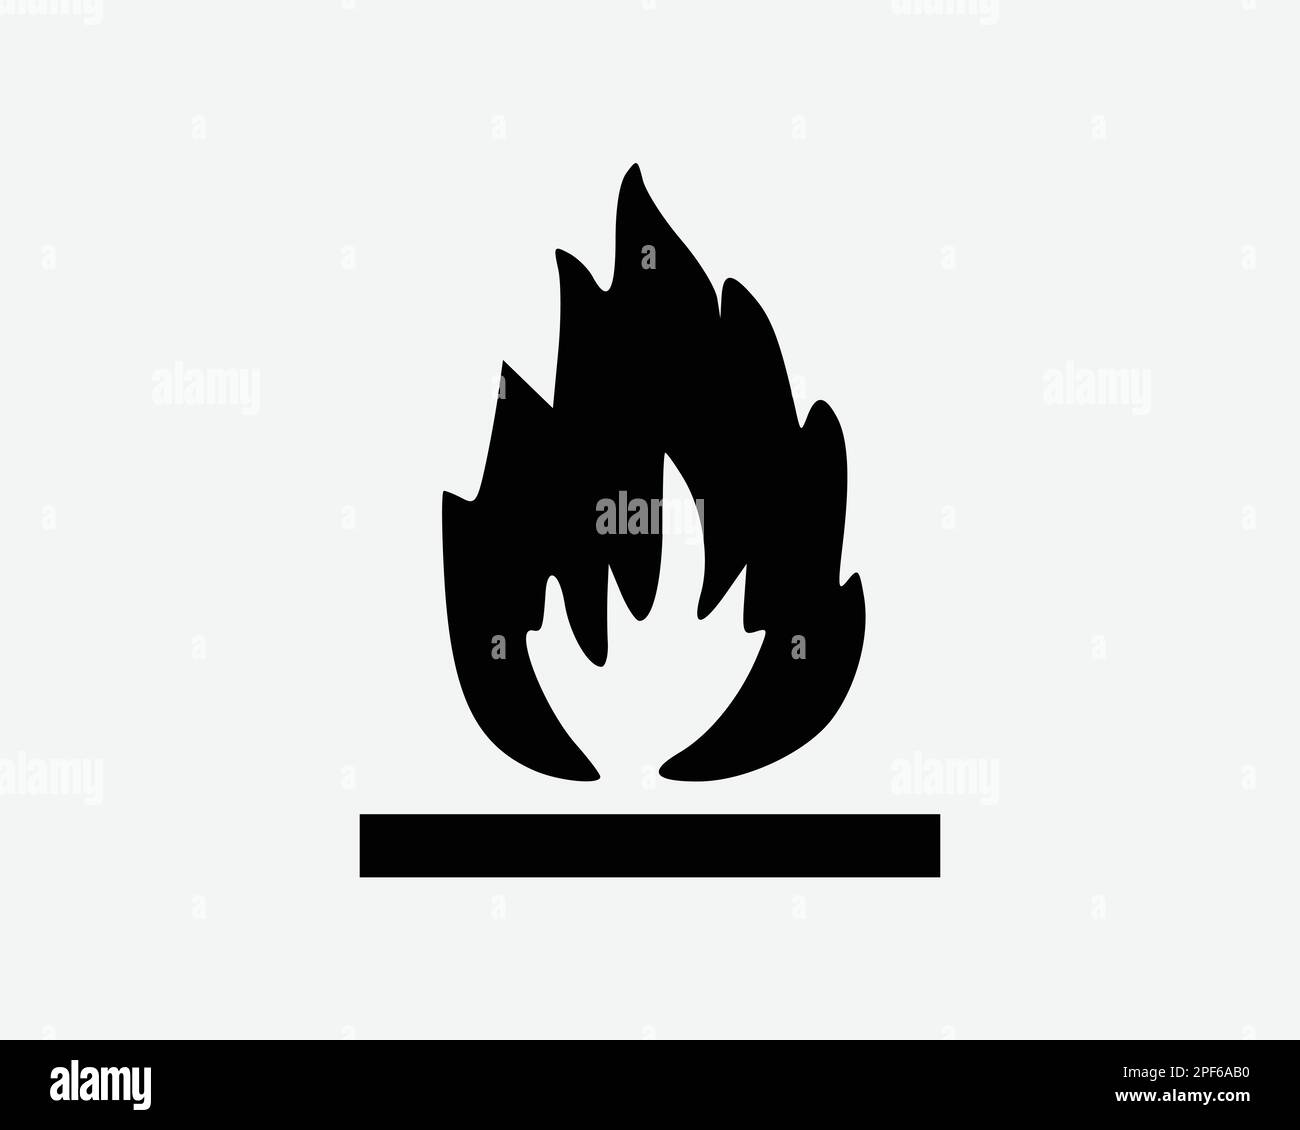 Fire Icon Flame Burn Burning Heat Ignite Hot Passion Warm Black White Silhouette Symbol Sign Graphic Clipart Artwork Illustration Pictogram Vector Stock Vector